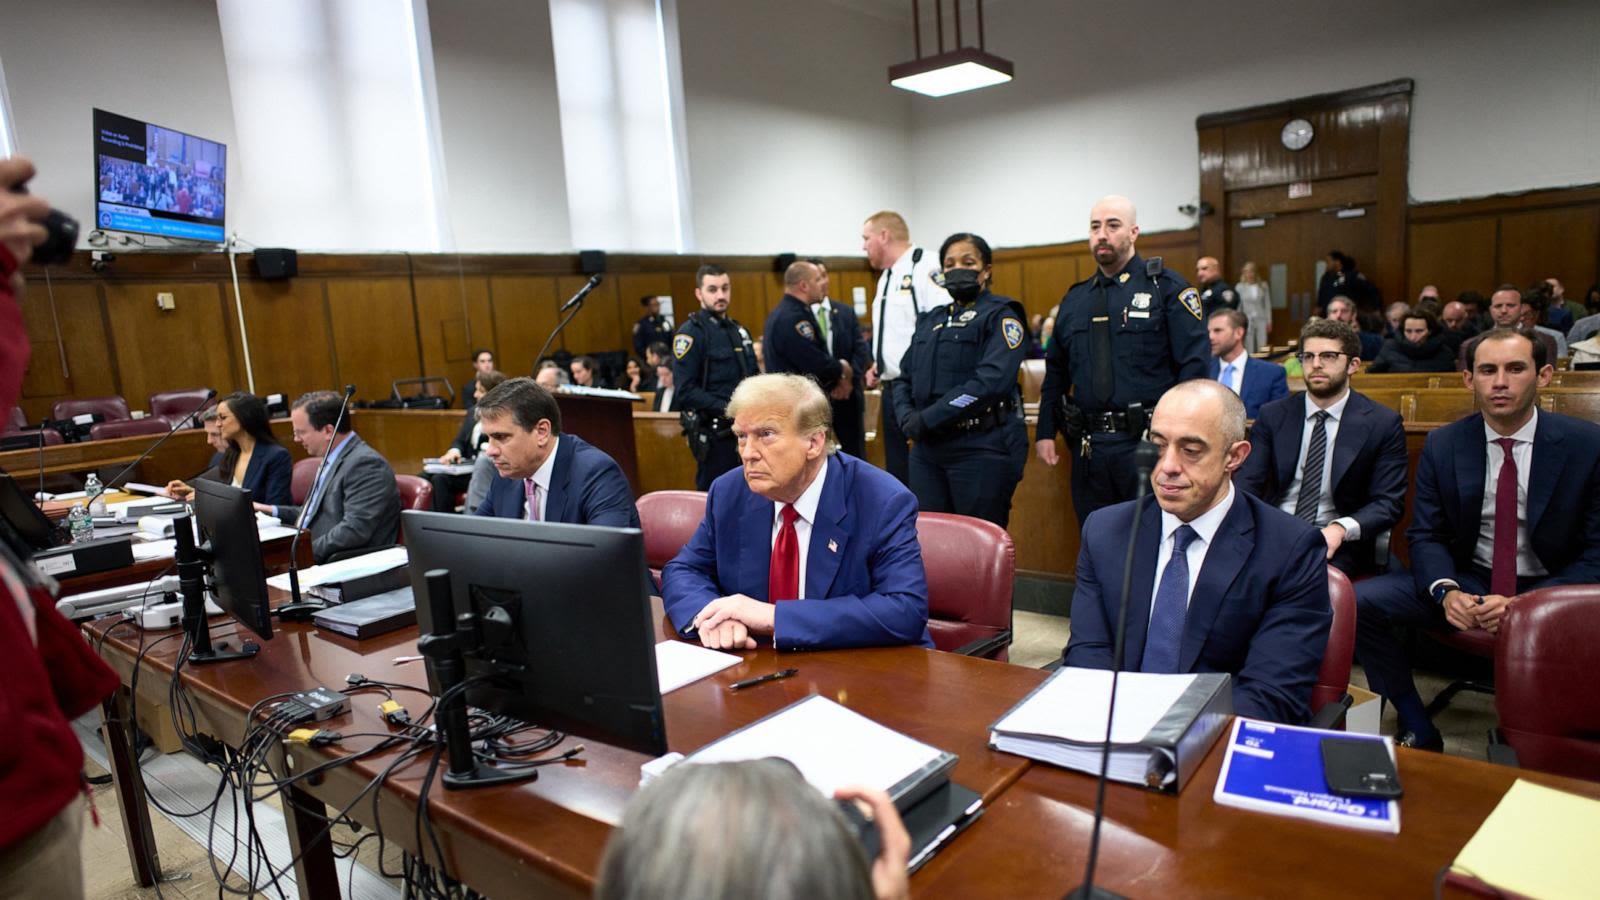 Trump trial live updates: 'We don't win' if people think stories are true, Trump said in 2016